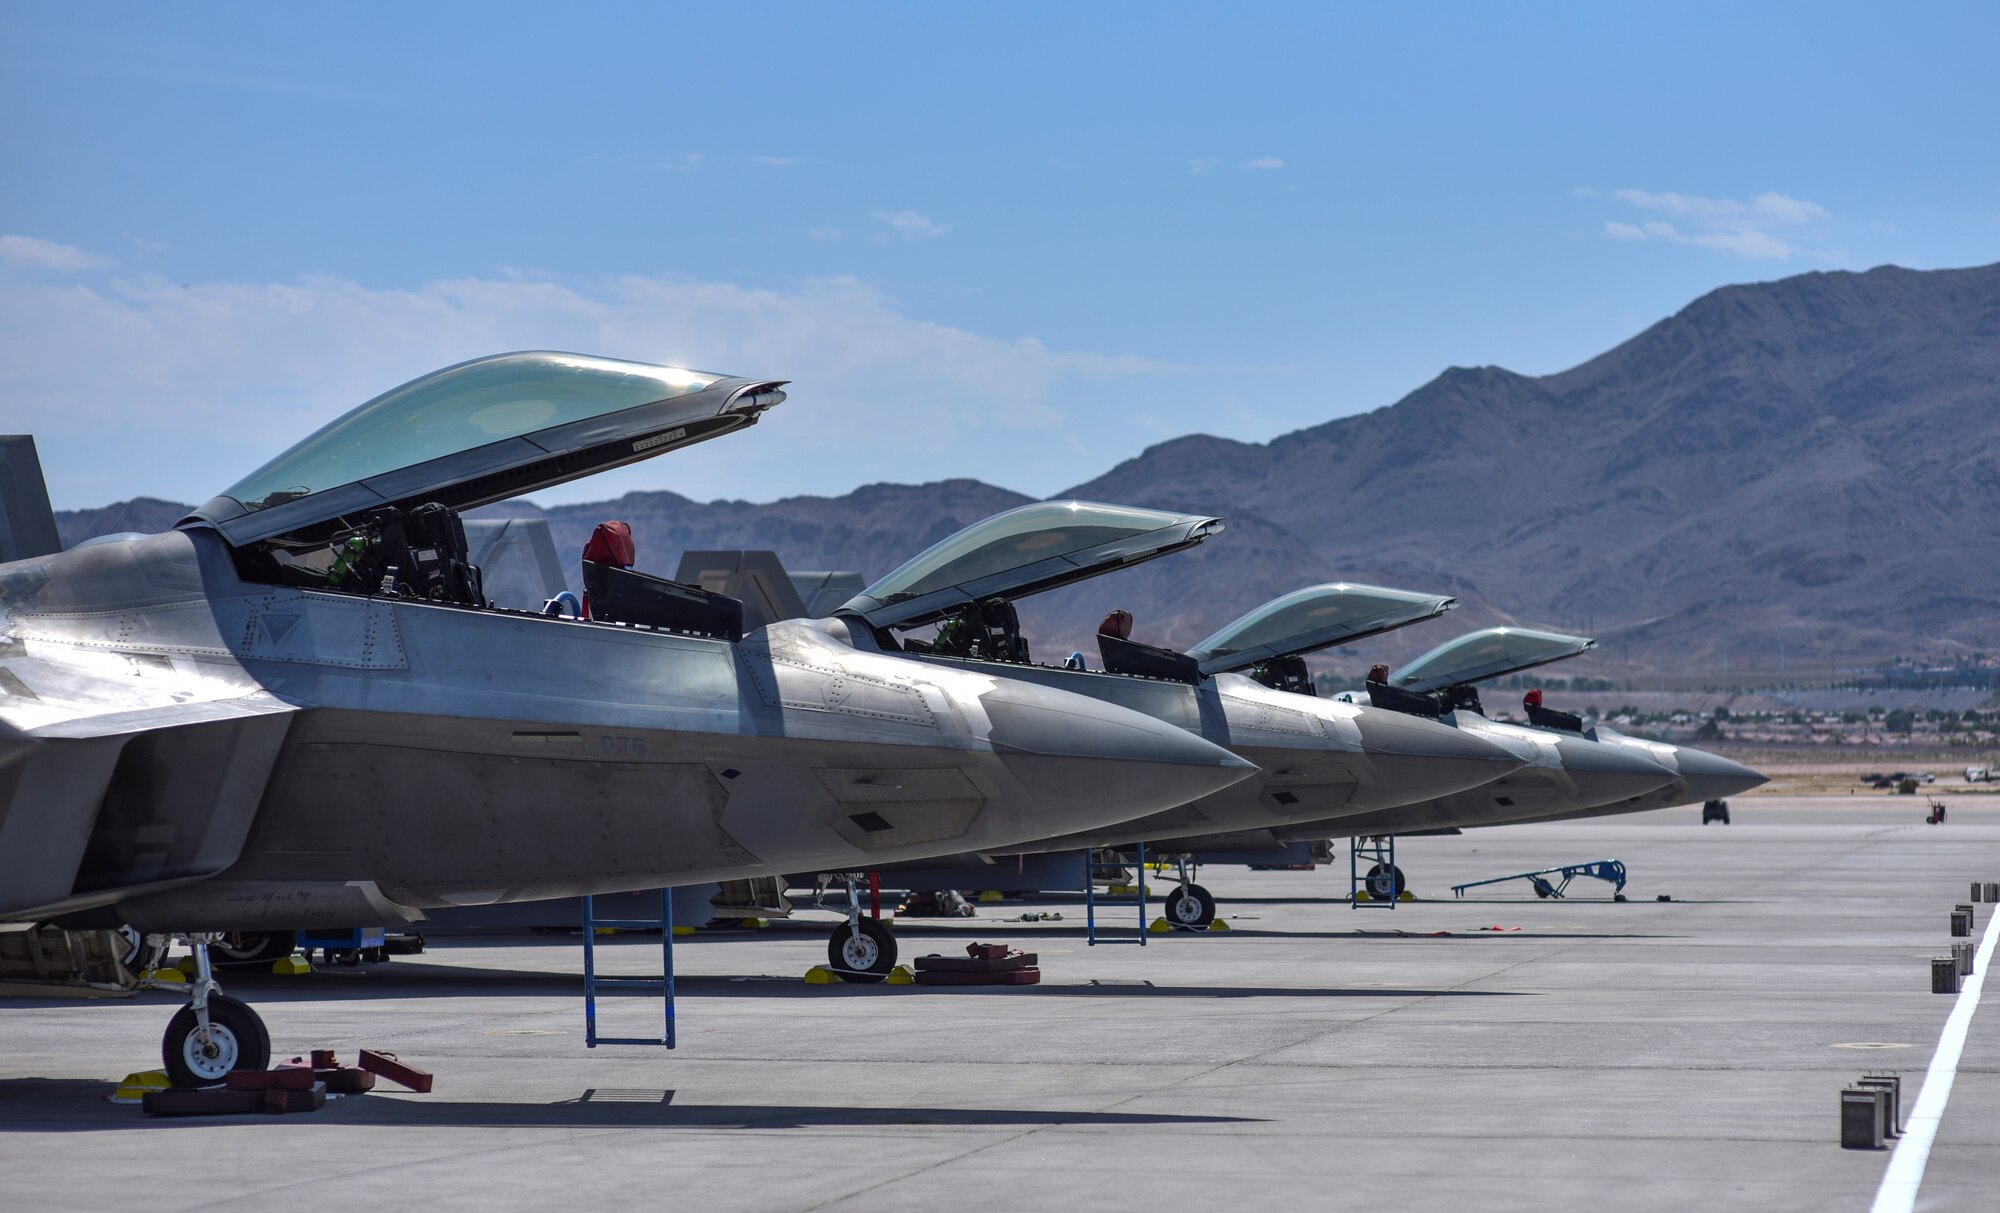 Four F-22 Raptors assigned to the 95th Fighter Squadron at Tyndall Air Force Base, Fla., sit on the flightline at Nellis Air Force Base, Nev., in preparation for Red Flag 17-3 July 7, 2017. This exercise gives Airmen an opportunity to experience realistic combat scenarios to prepare and train them in the event of future conflicts or war. (U.S. Air Force photo by Senior Airman Dustin Mullen/Released)